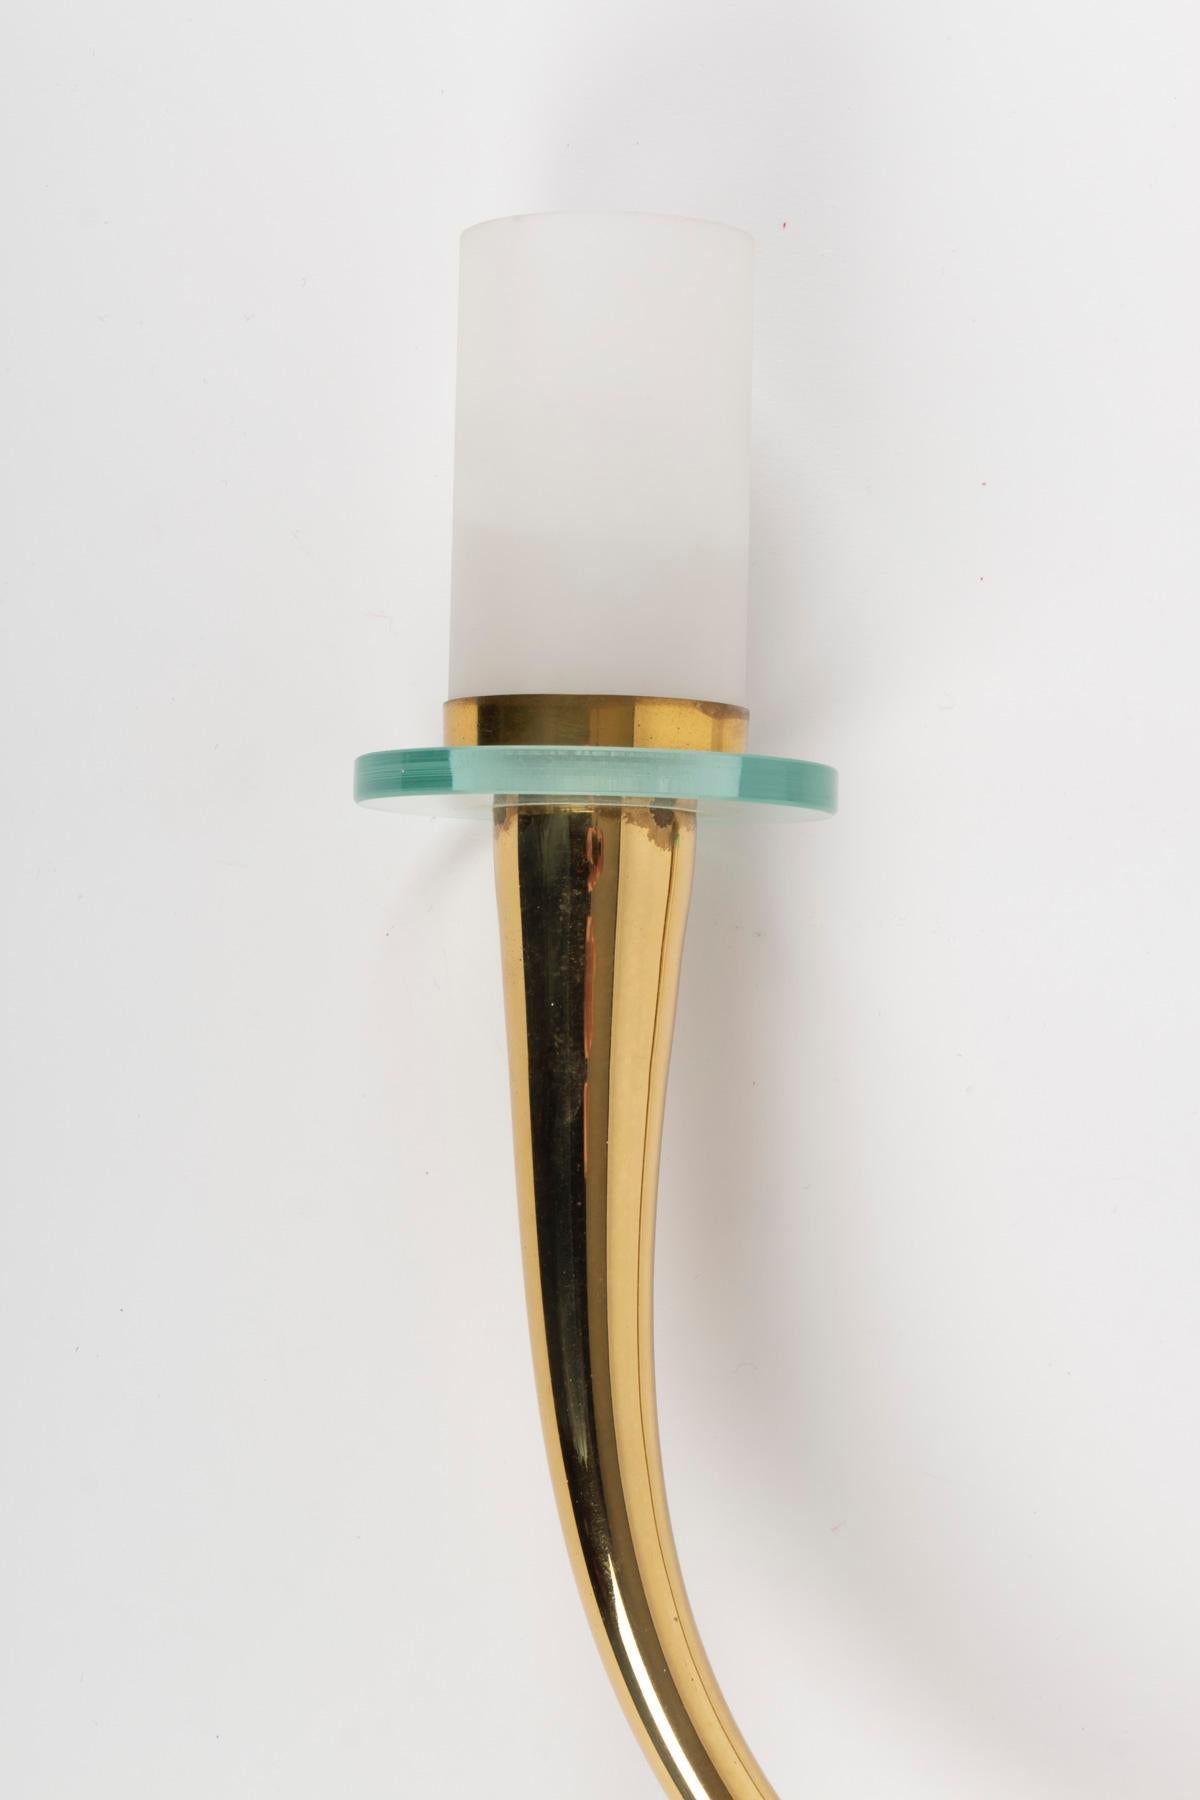 Mid-20th Century 1960s Pair of Brass Sconces in the Style of Gio Ponti